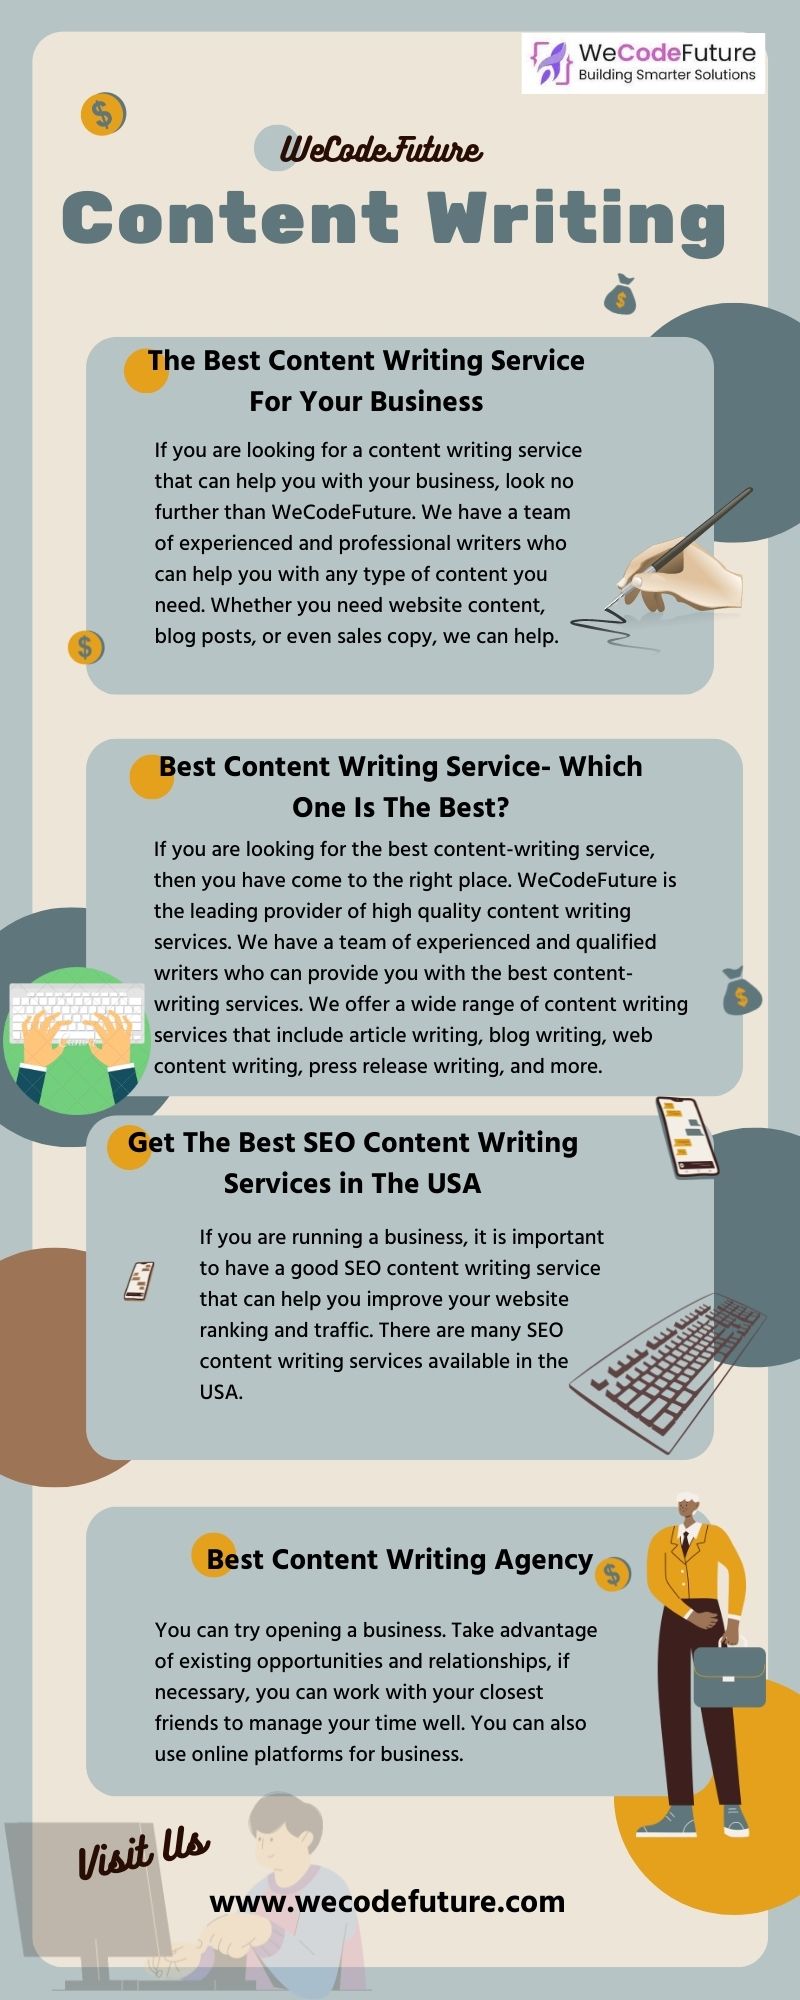 The Best Content Writing Services | WECODEFUTURE